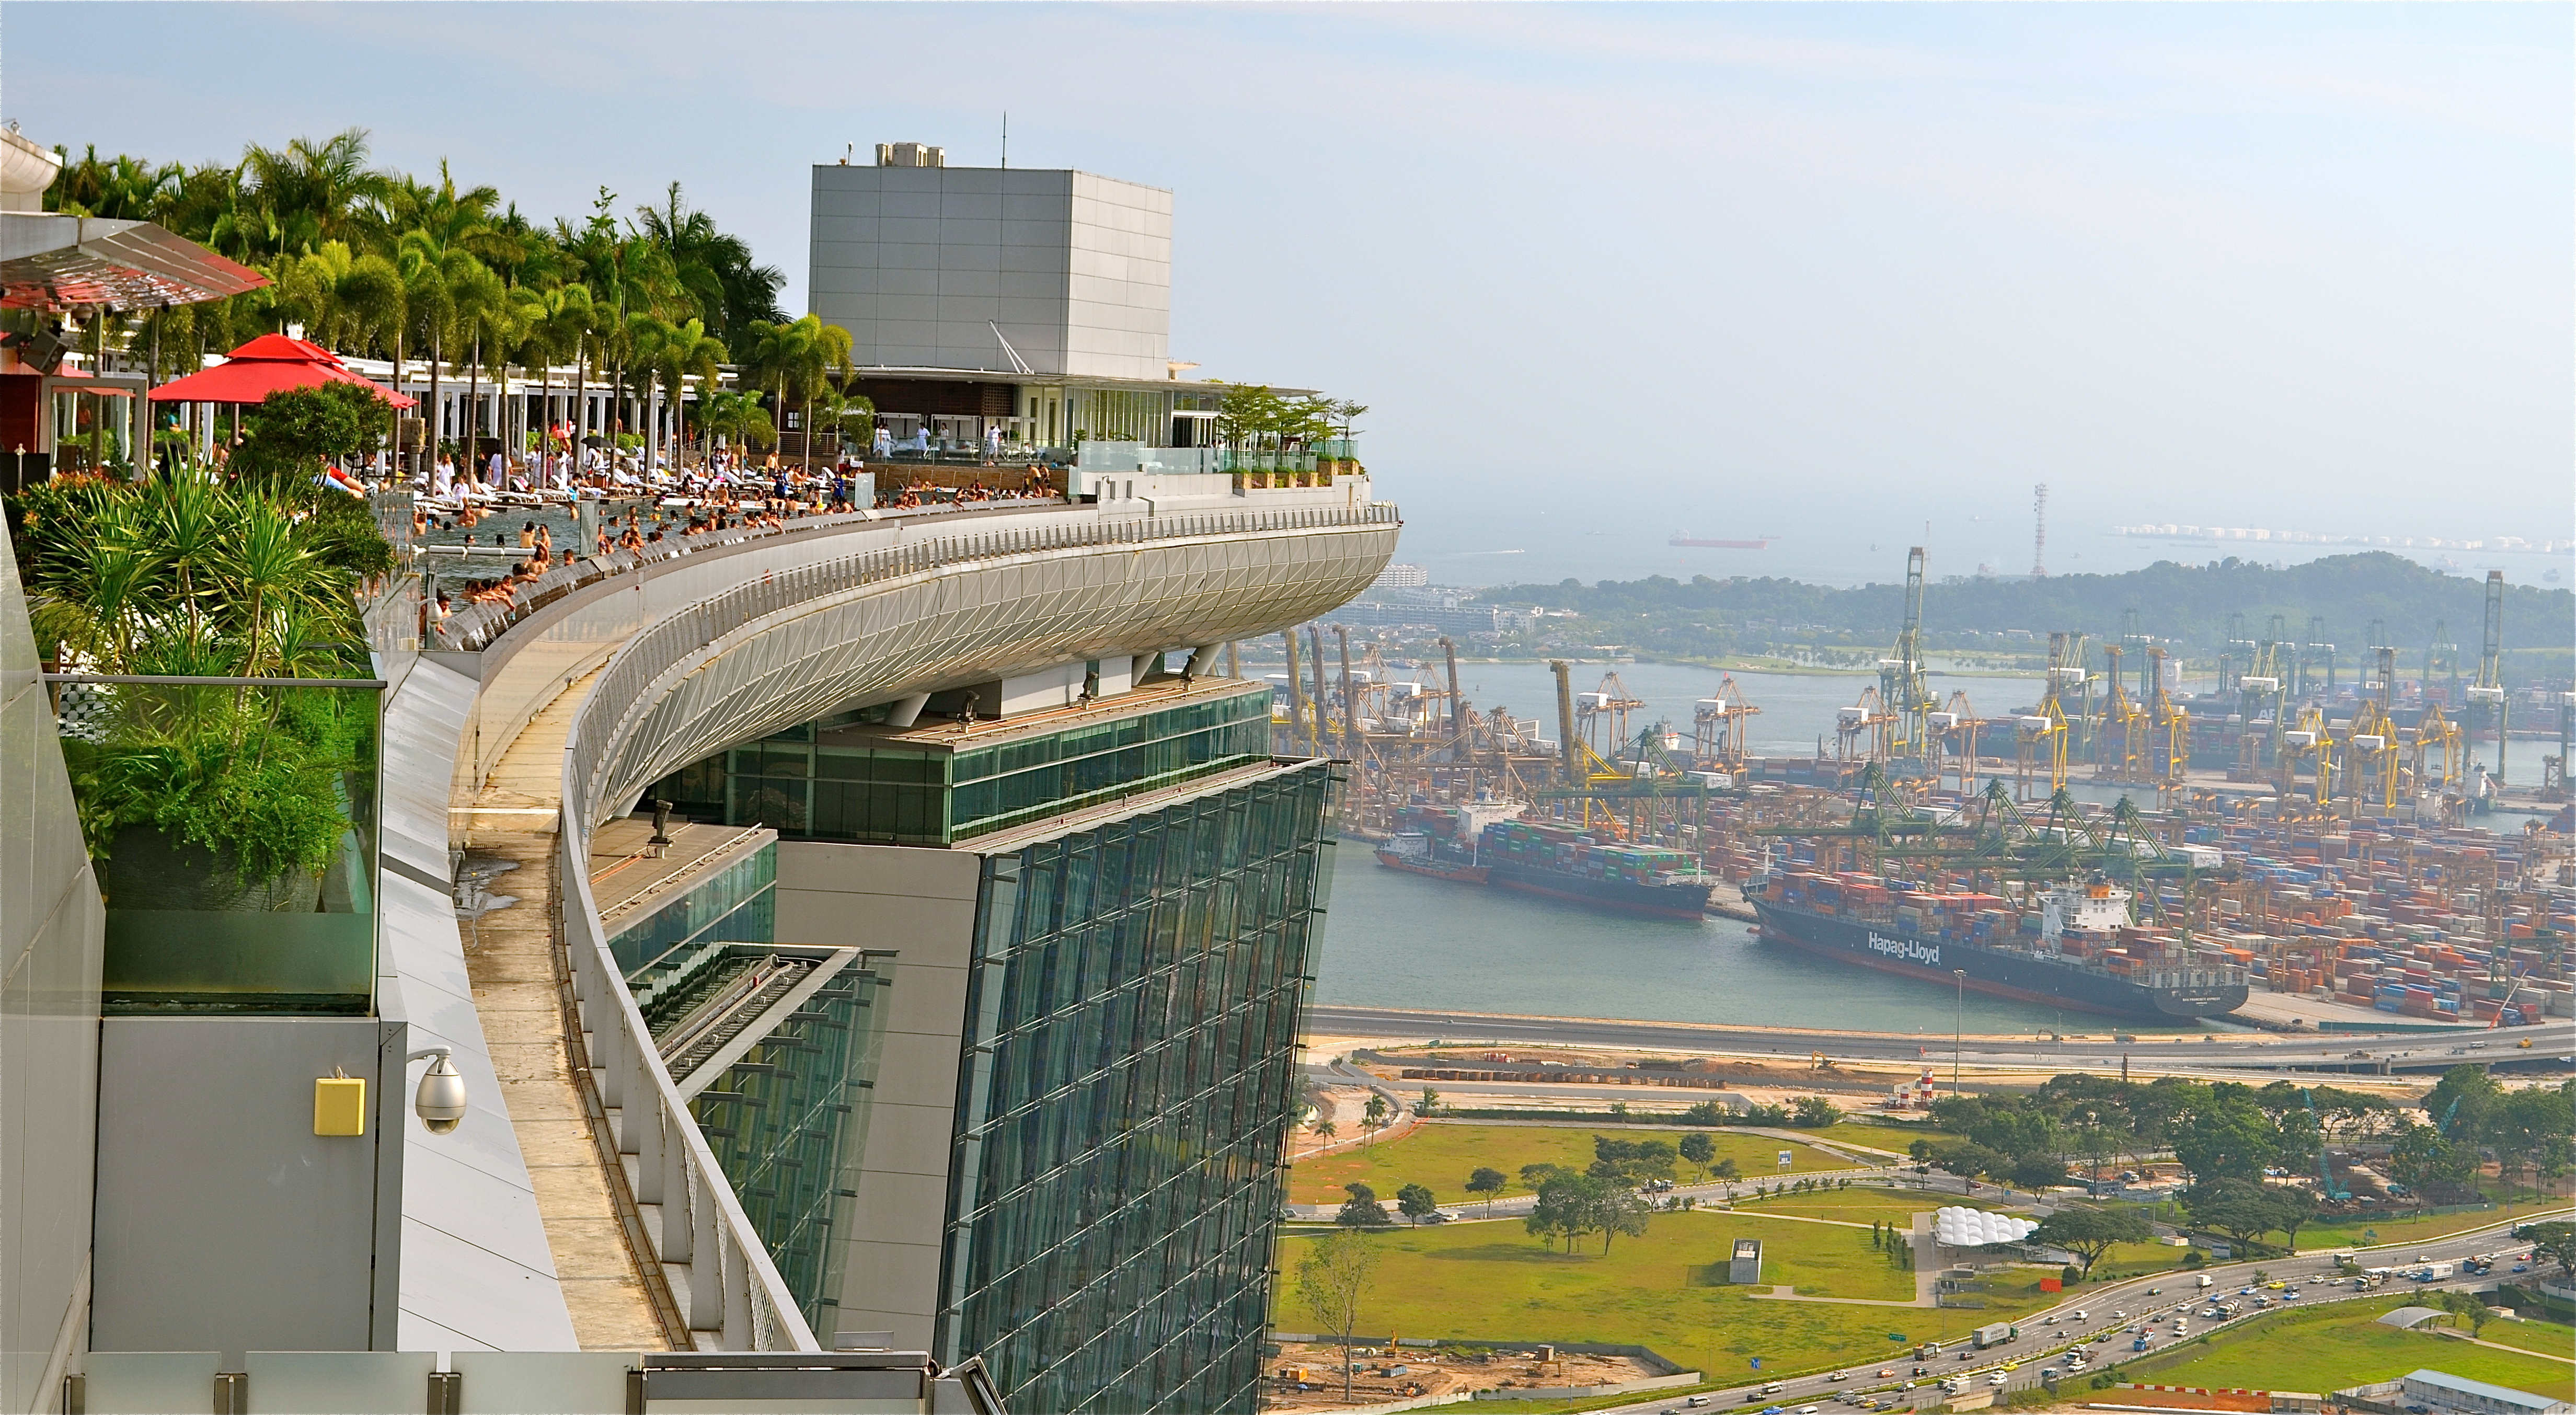 Don’t Miss to See Marina Bay Sands SkyPark in Singapore